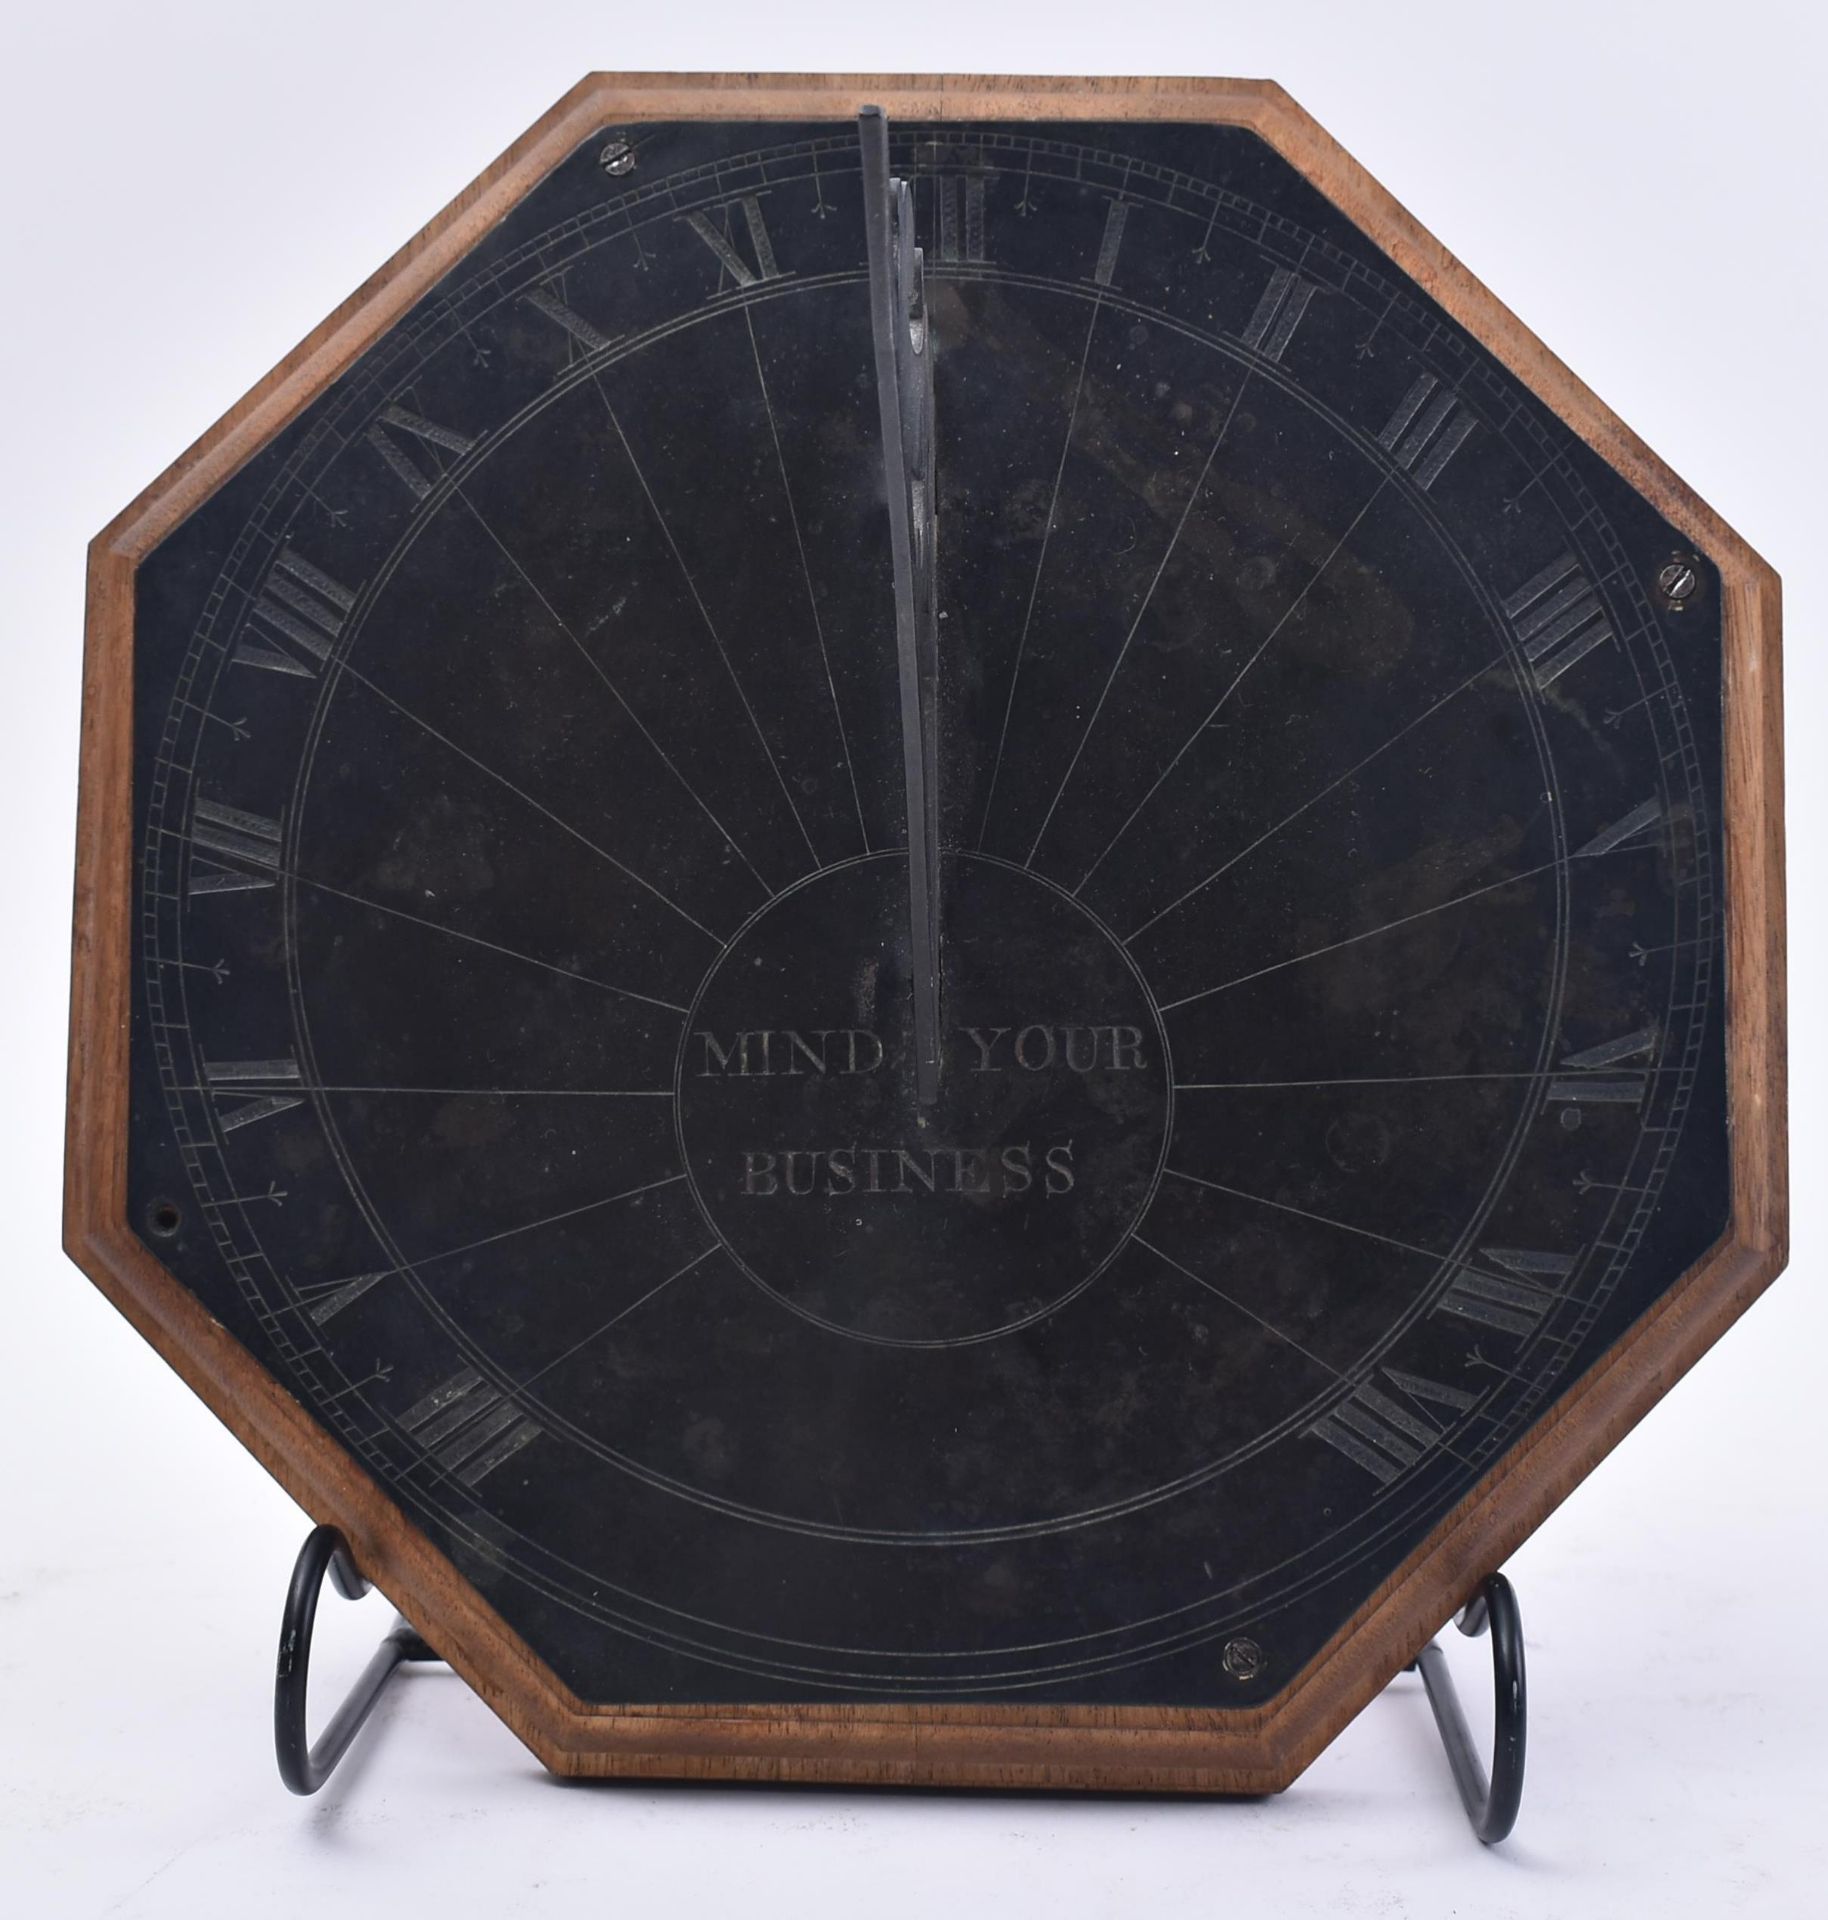 18TH CENTURY AMERICAN BRONZE SUNDIAL - " MIND YOUR BUSINESS " - Image 3 of 4